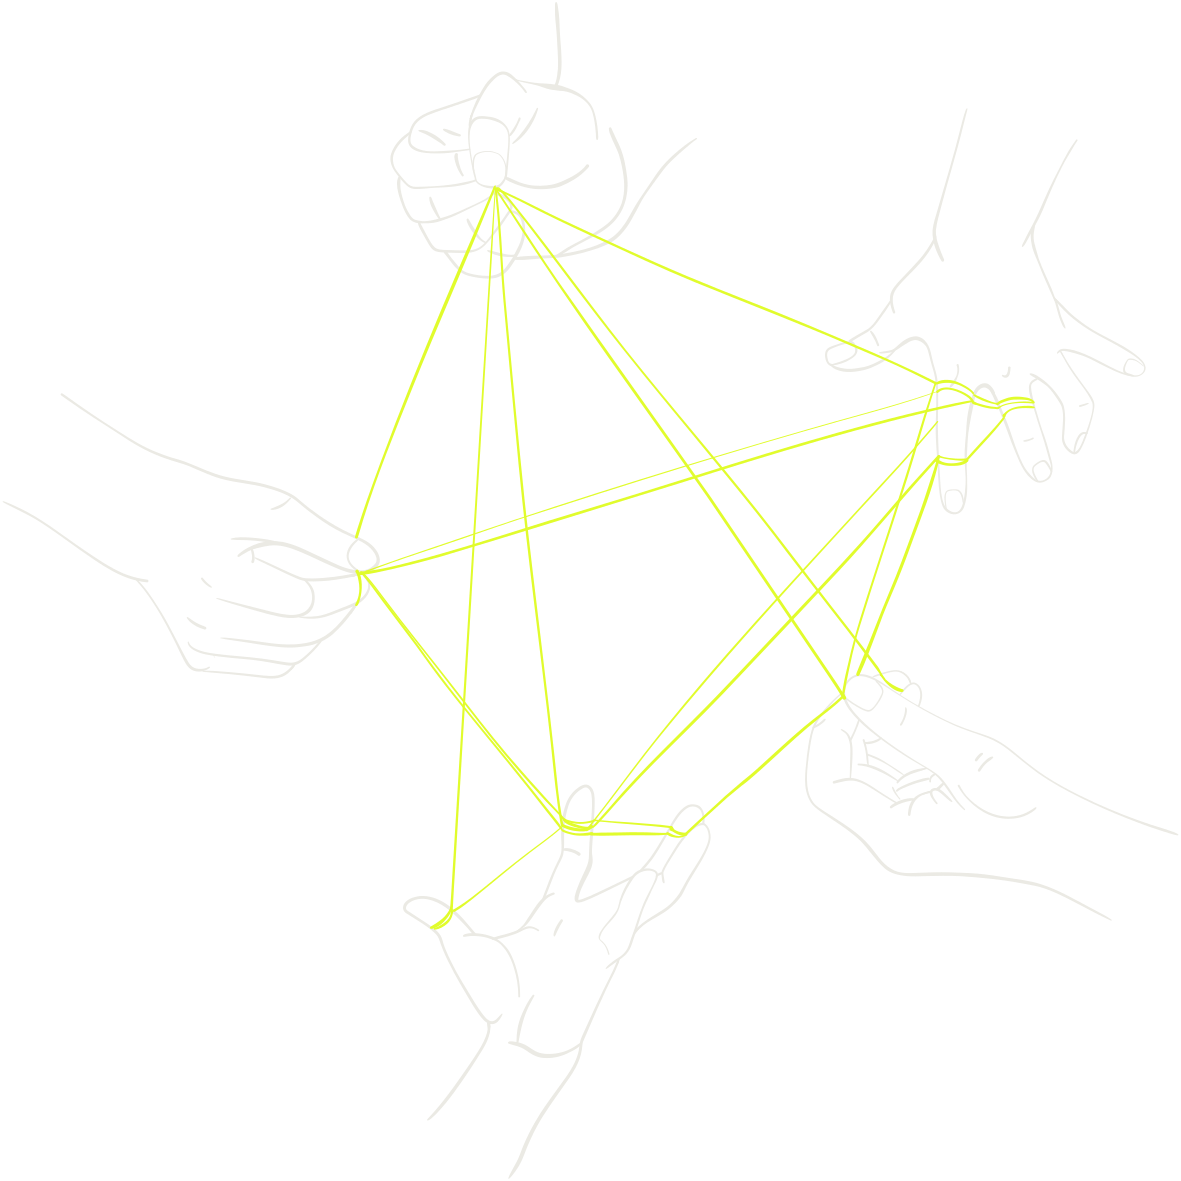 Five hands connected by  strings, a symbolic representation of the systems thinking required for strategic decision making